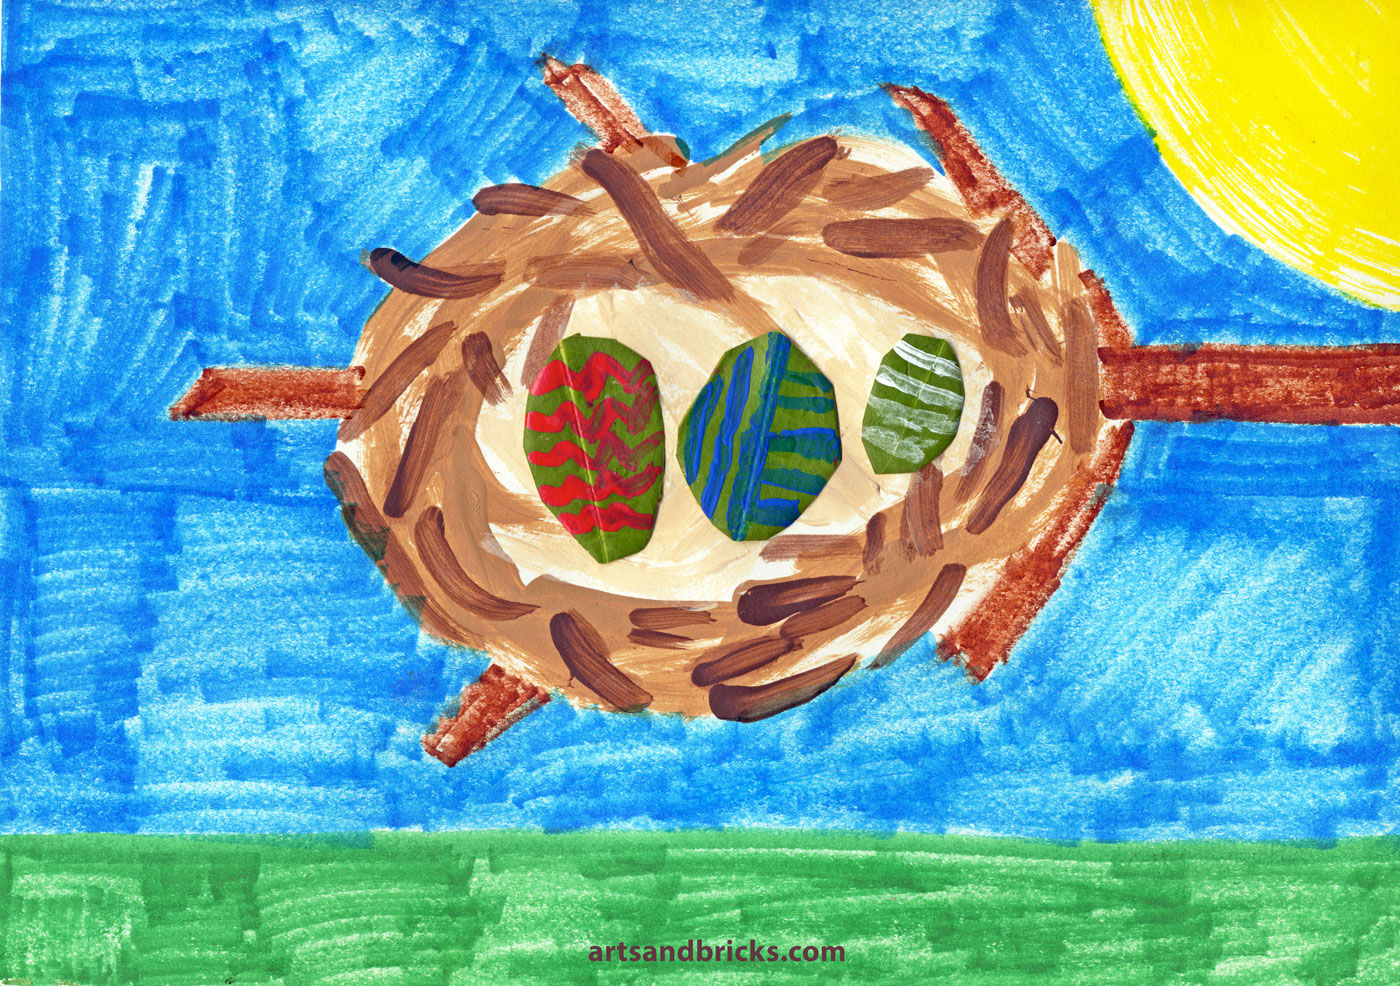 Use found leaves to create this painted Kid's Nature Art project. The painted nest rests in a tree branch, with colorful decorated Eggs (maybe Easter eggs!) made from cut and painted leaves. A beautiful elementary-age nature art project!